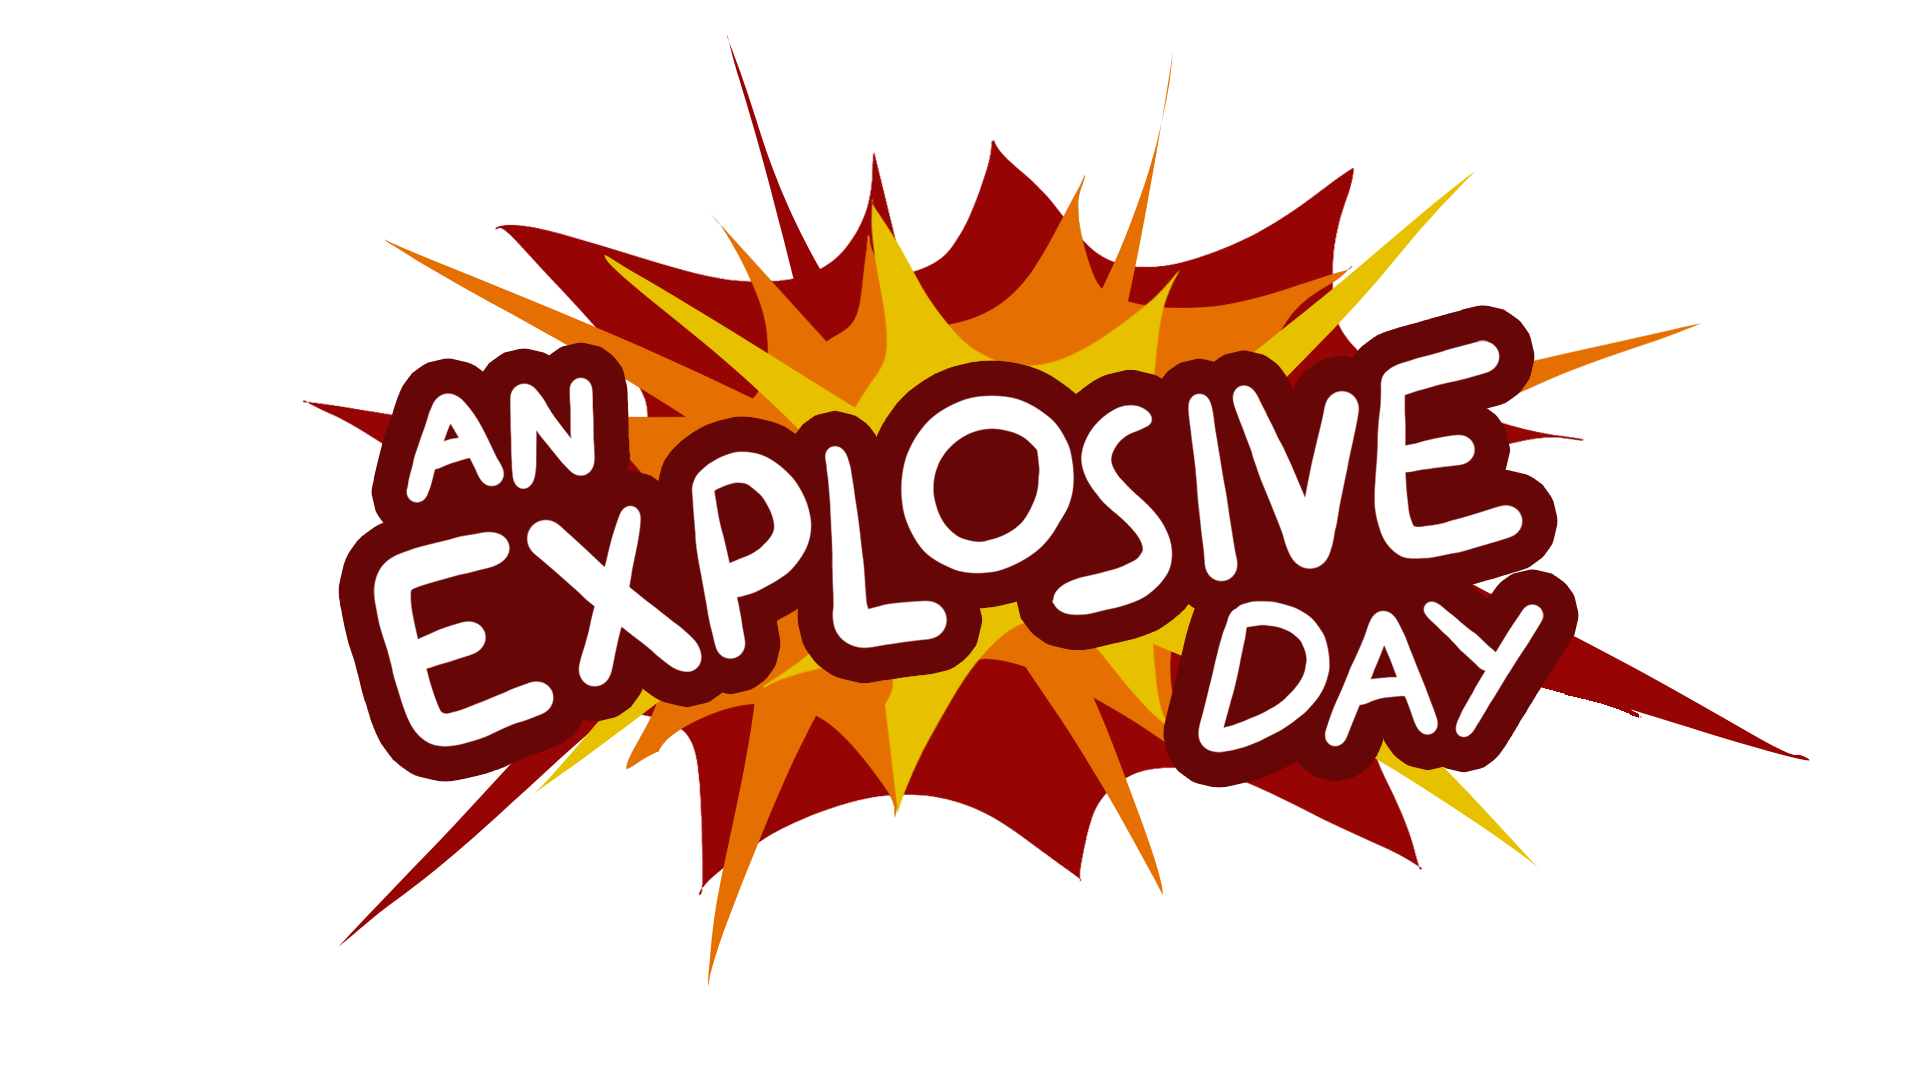 An Explosive Day (Game Jam)